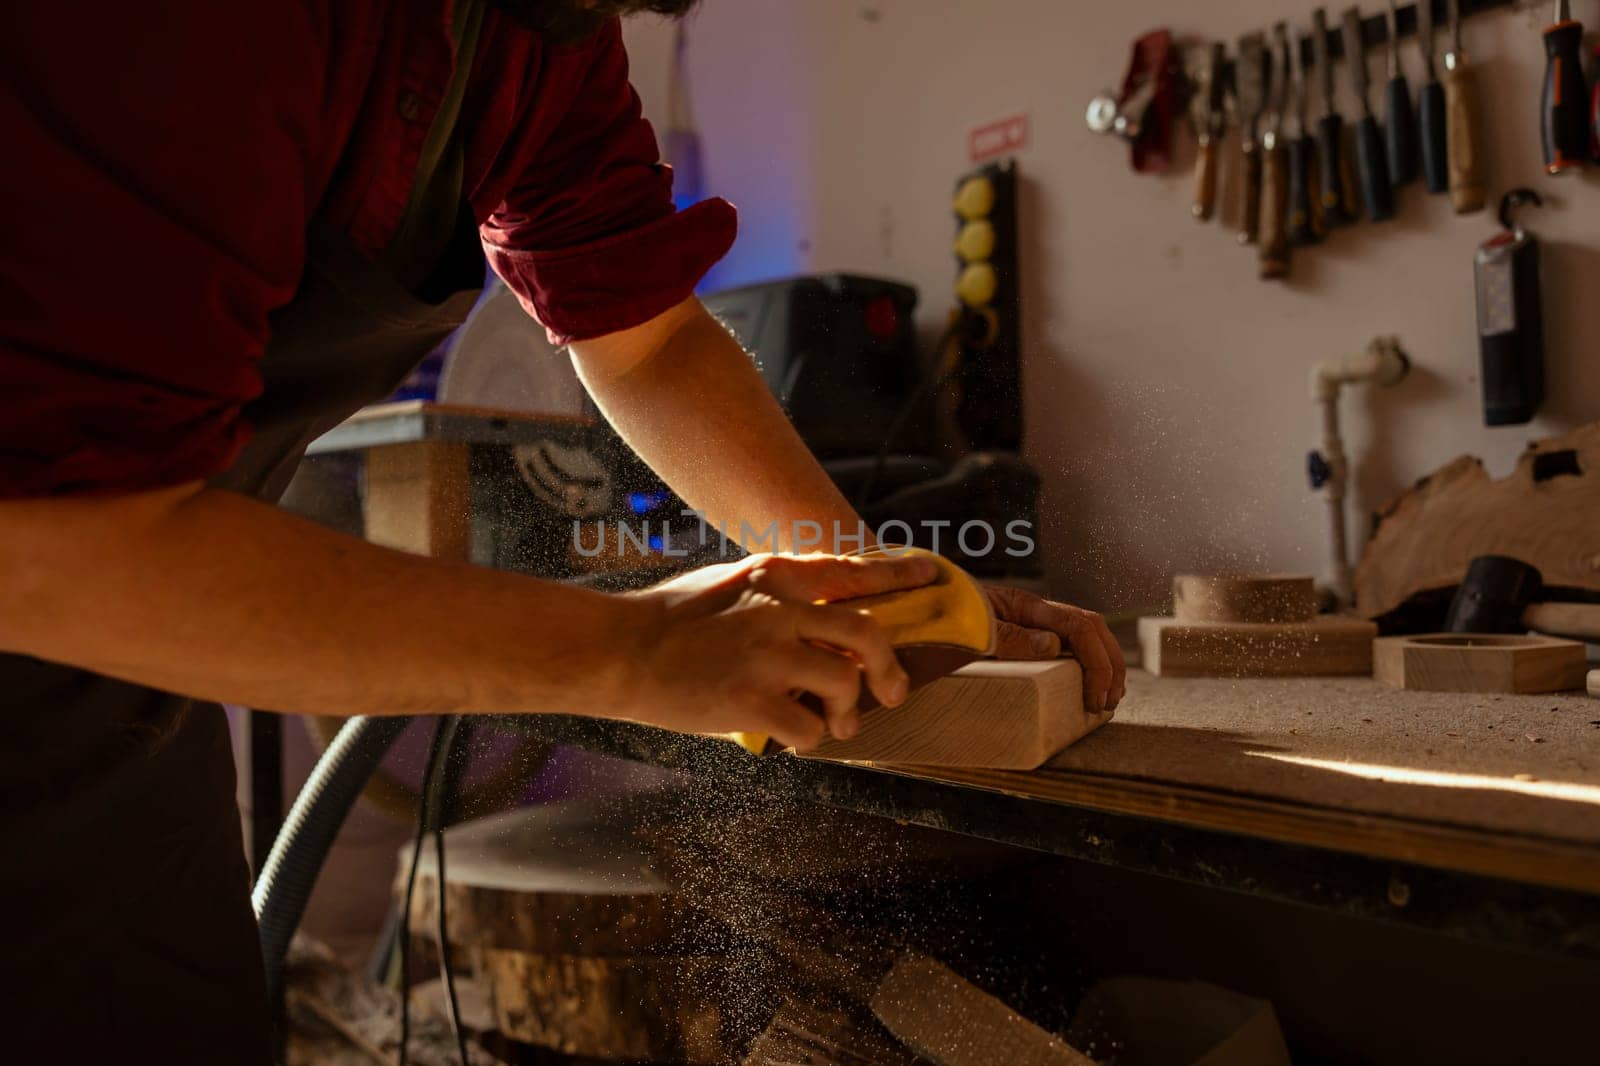 Woodworking expert using sandpaper to sander wood, making wooden products by DCStudio